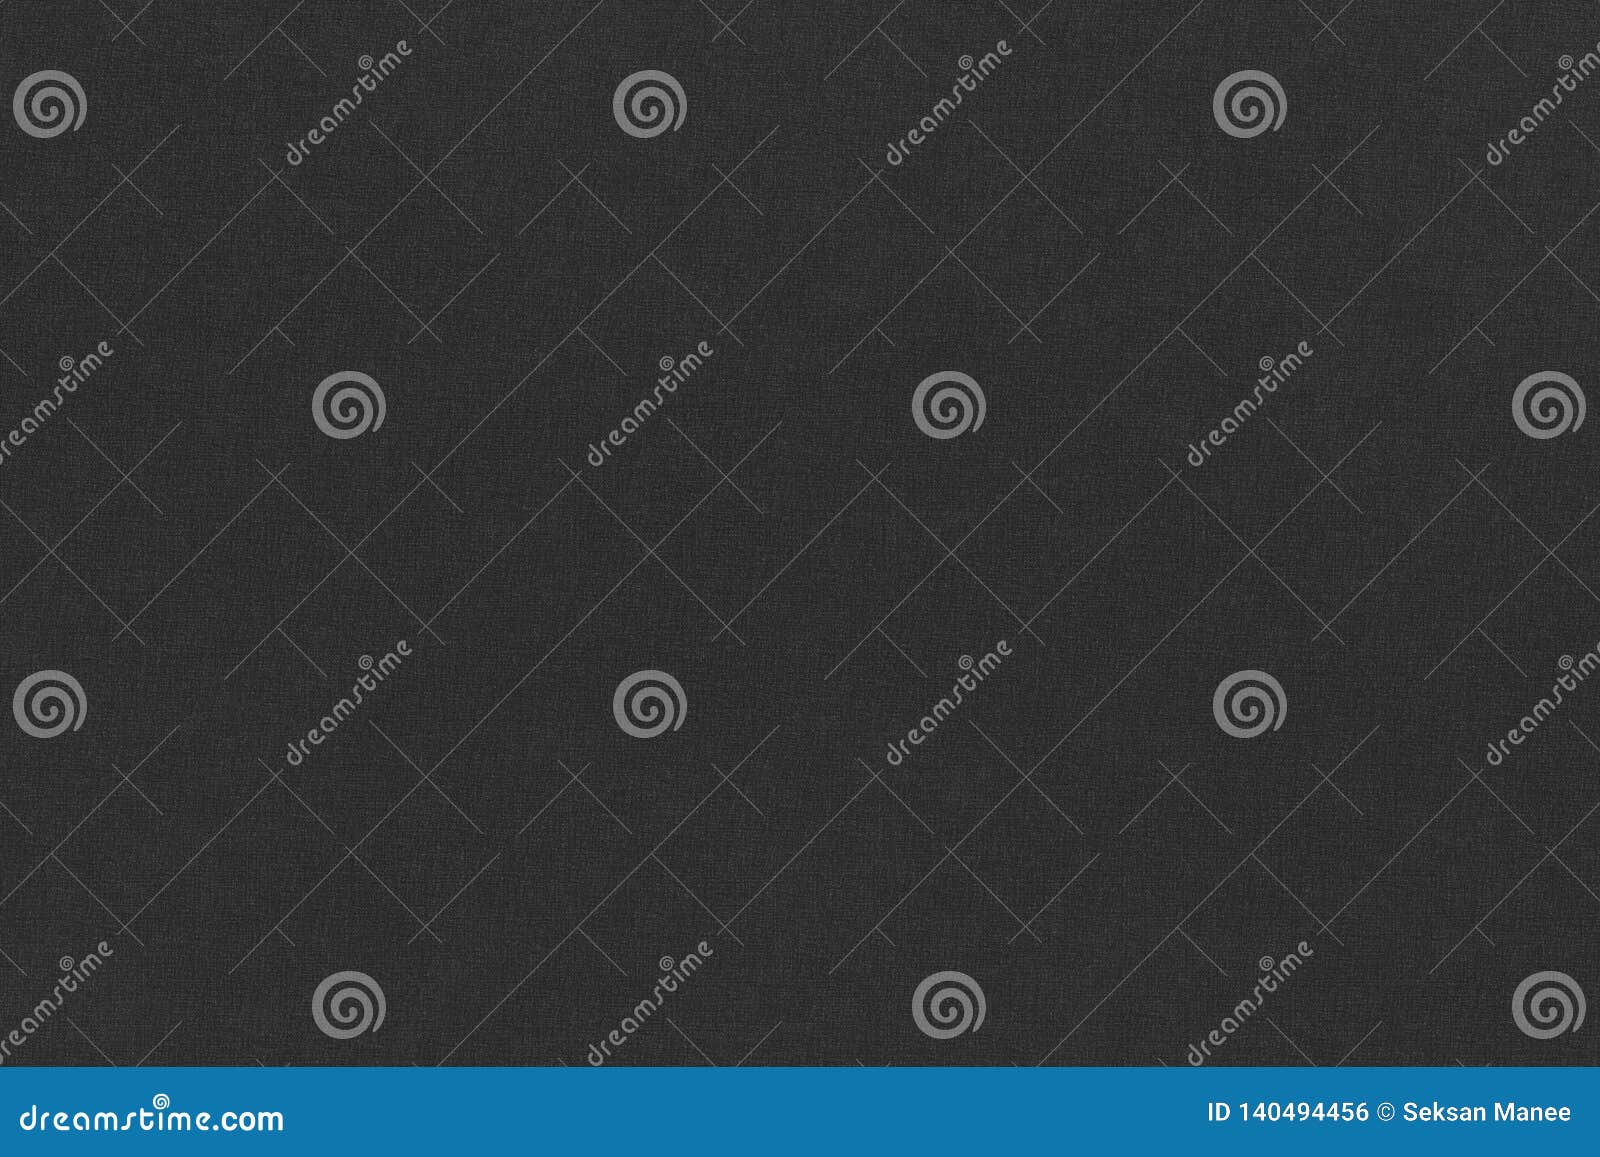 black linen fabric with crosshatch pattern textures background